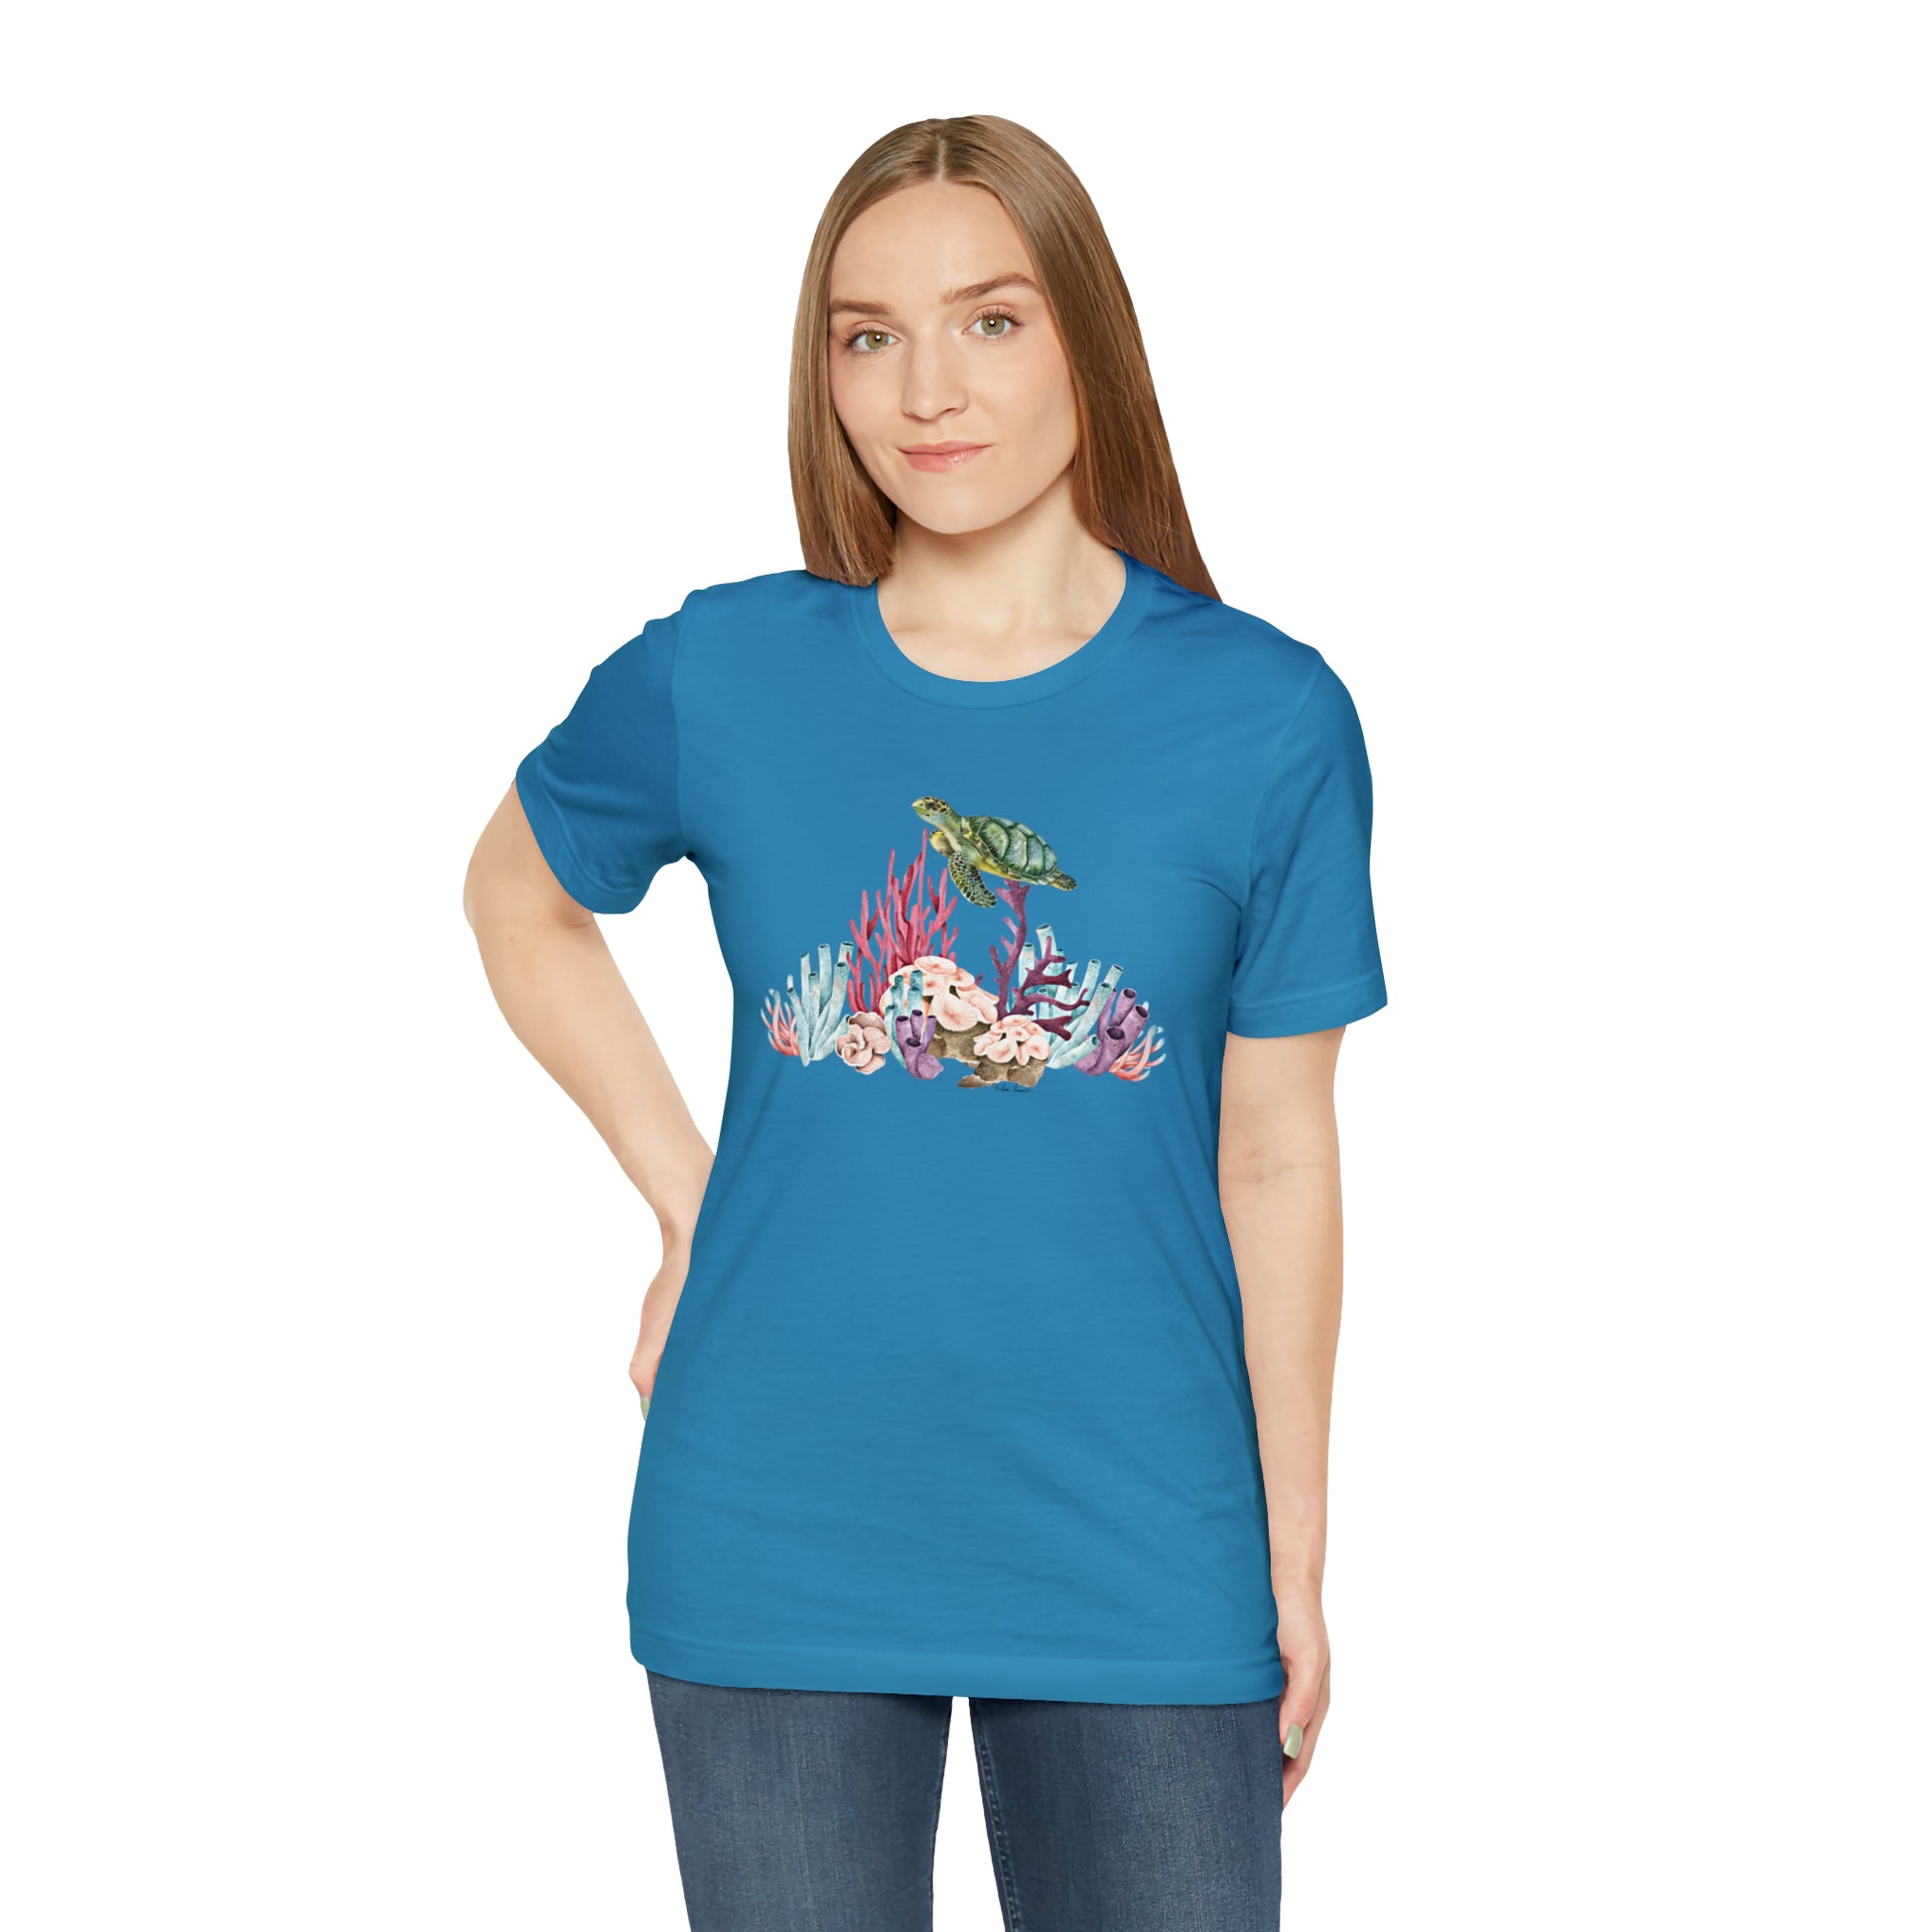 Mock up of a blond-haired woman wearing the aqua shirt